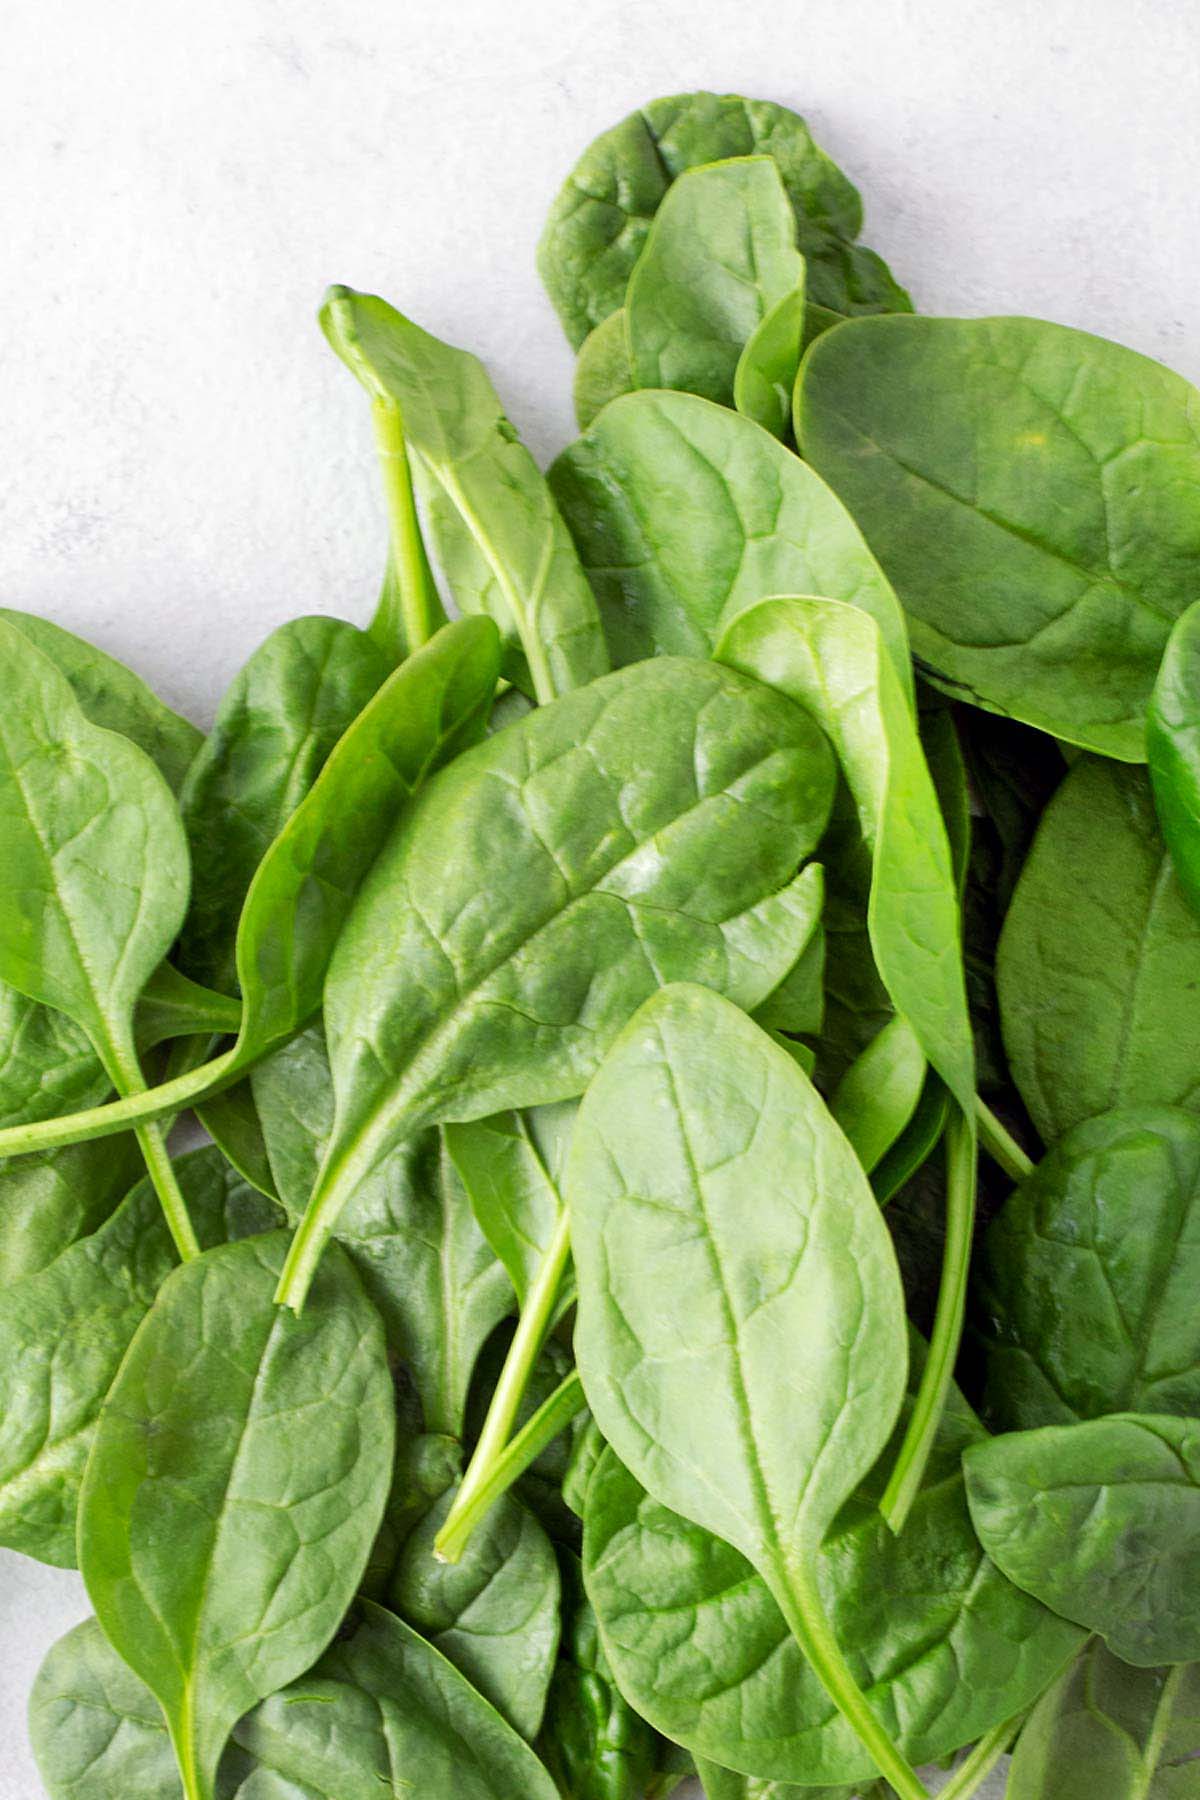 Spinach in a pile.